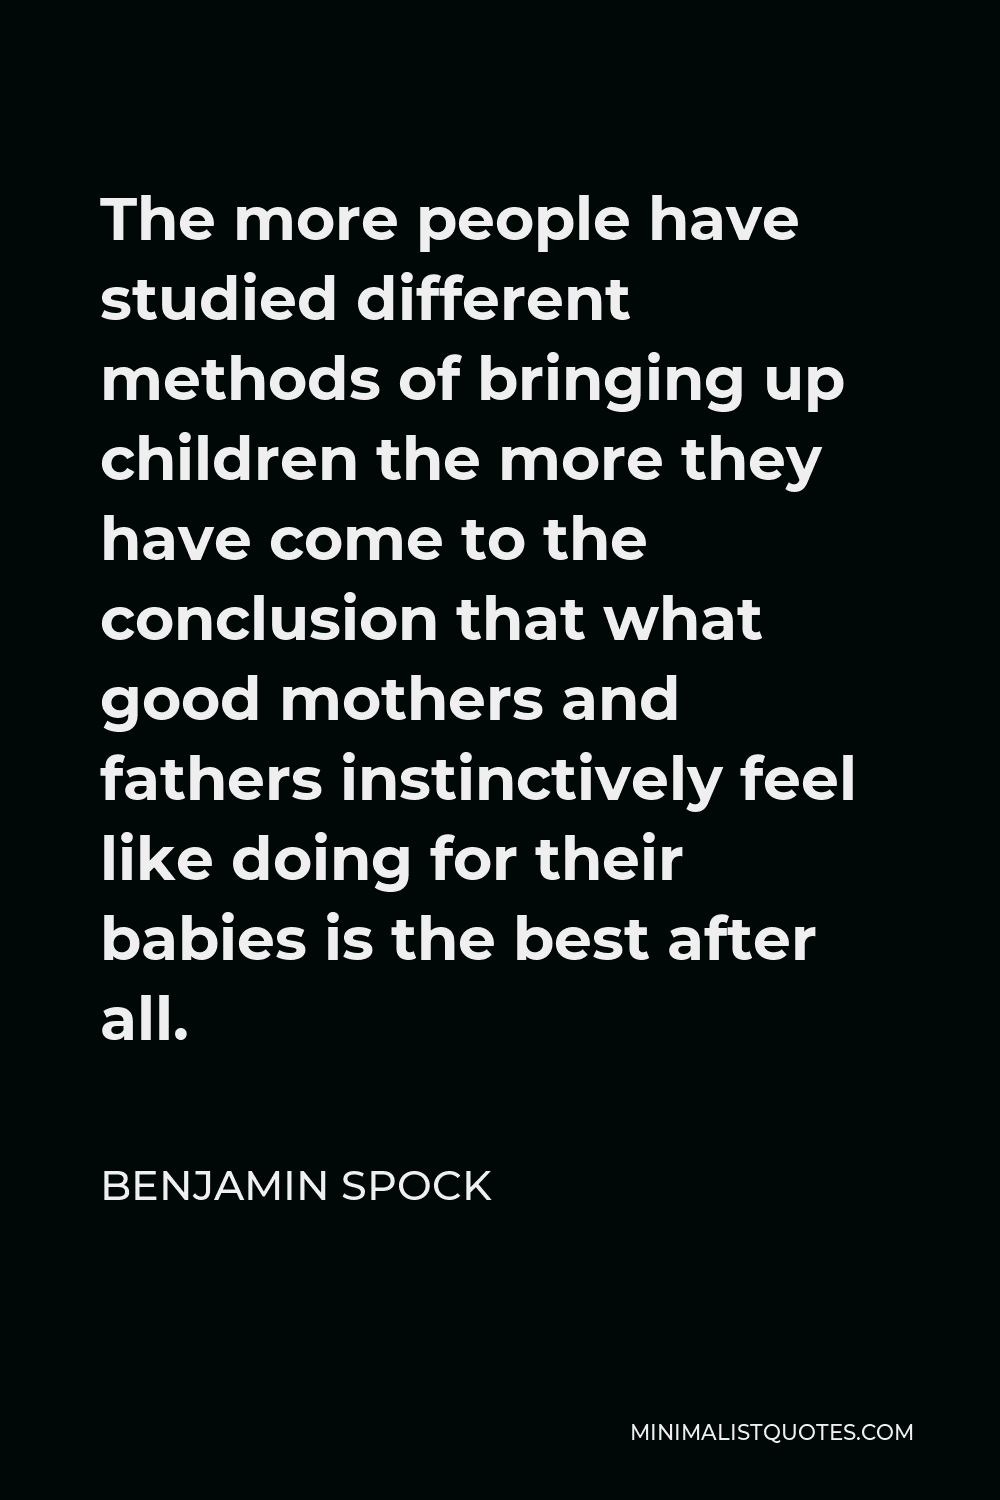 Benjamin Spock Quote - The more people have studied different methods of bringing up children the more they have come to the conclusion that what good mothers and fathers instinctively feel like doing for their babies is the best after all.